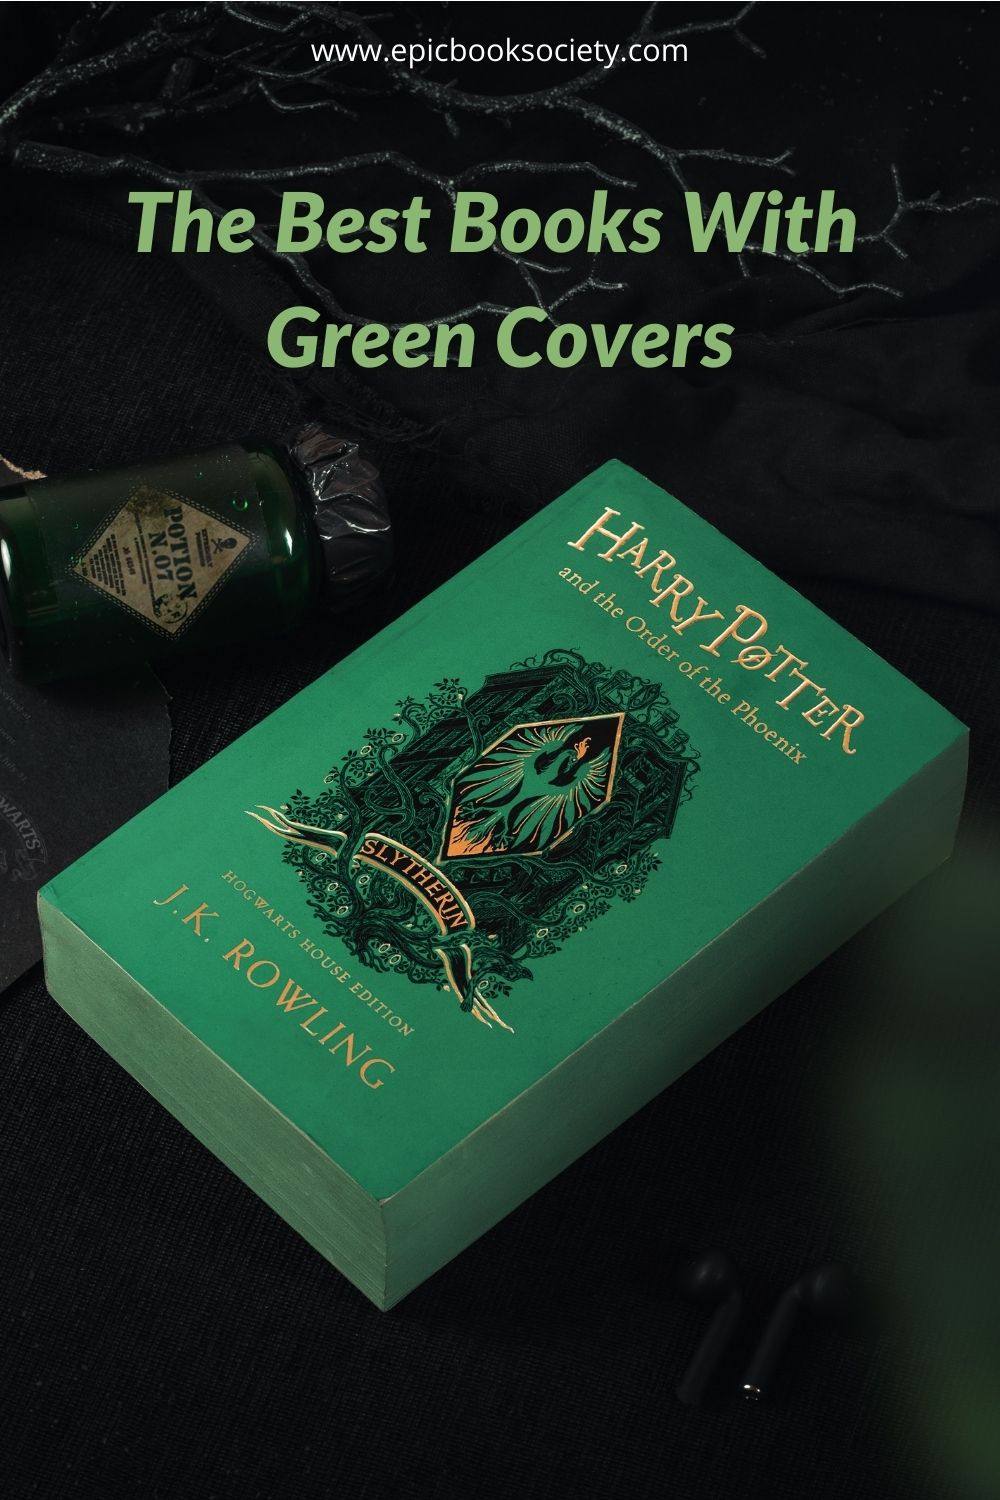 Books with a green cover